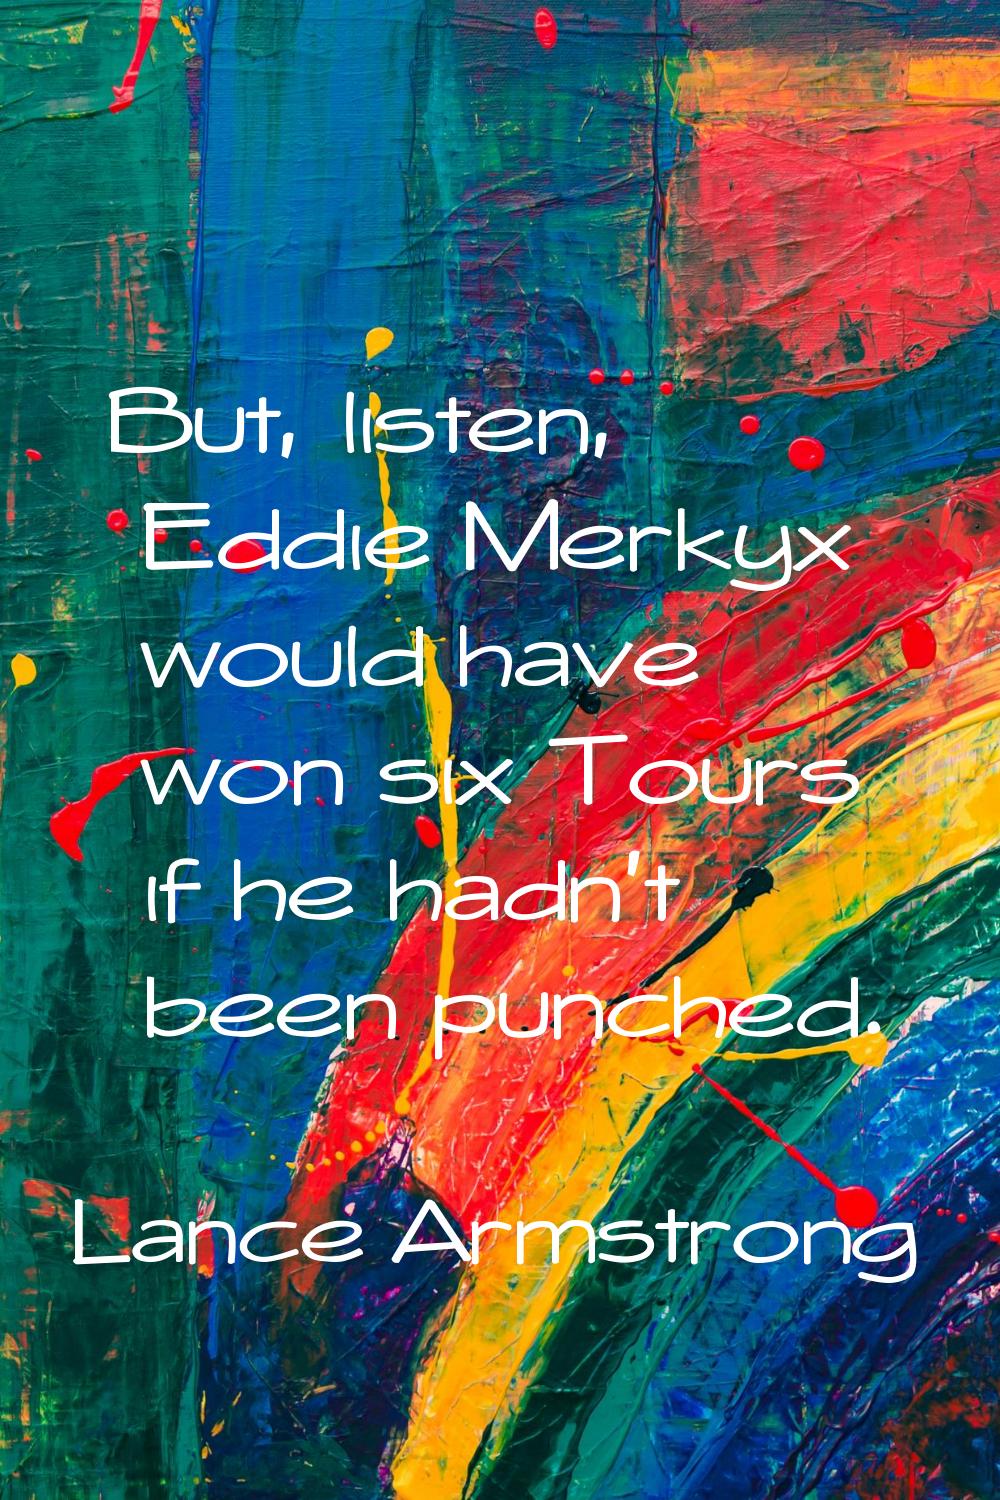 But, listen, Eddie Merkyx would have won six Tours if he hadn't been punched.